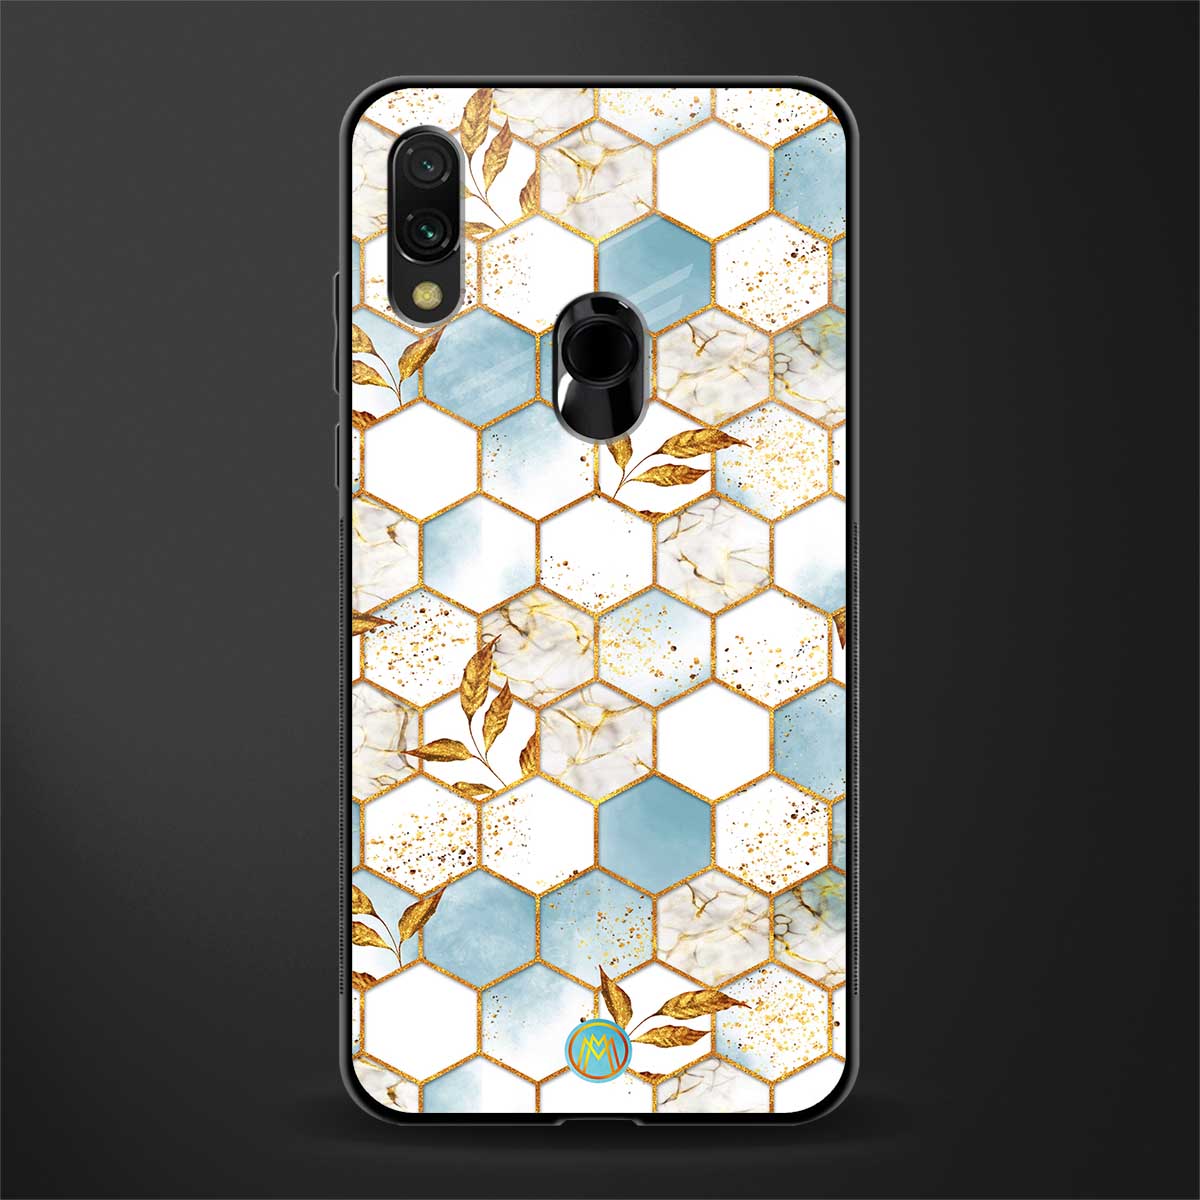 white marble tiles glass case for redmi note 7 pro image